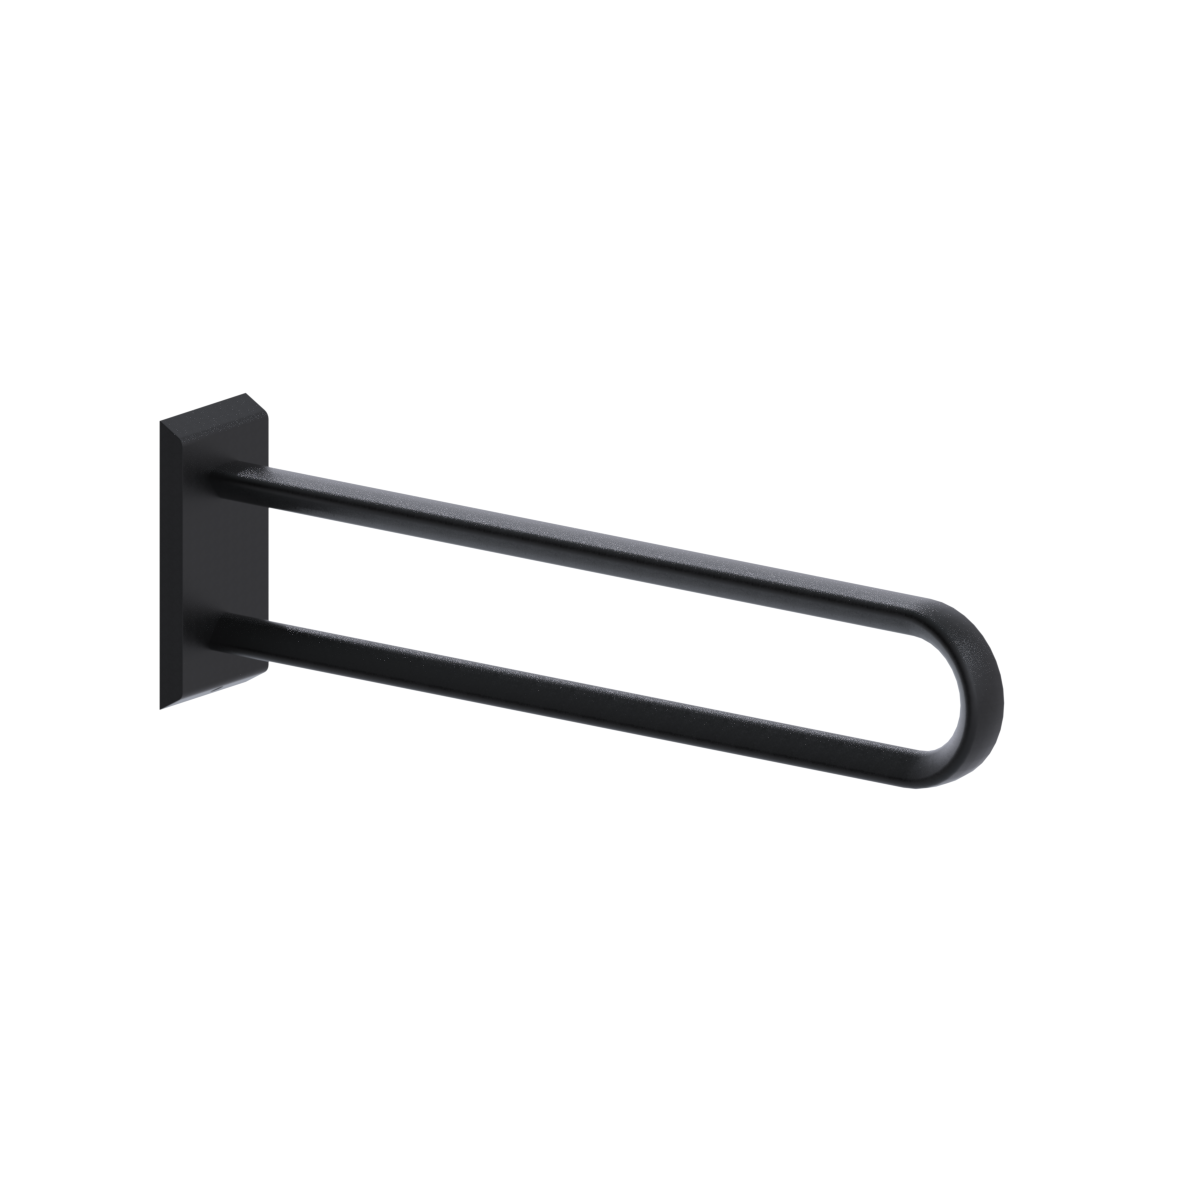 Cavere Care Wall support rail vario, with base plate, left and right, L = 725 mm, Cavere Carbon black